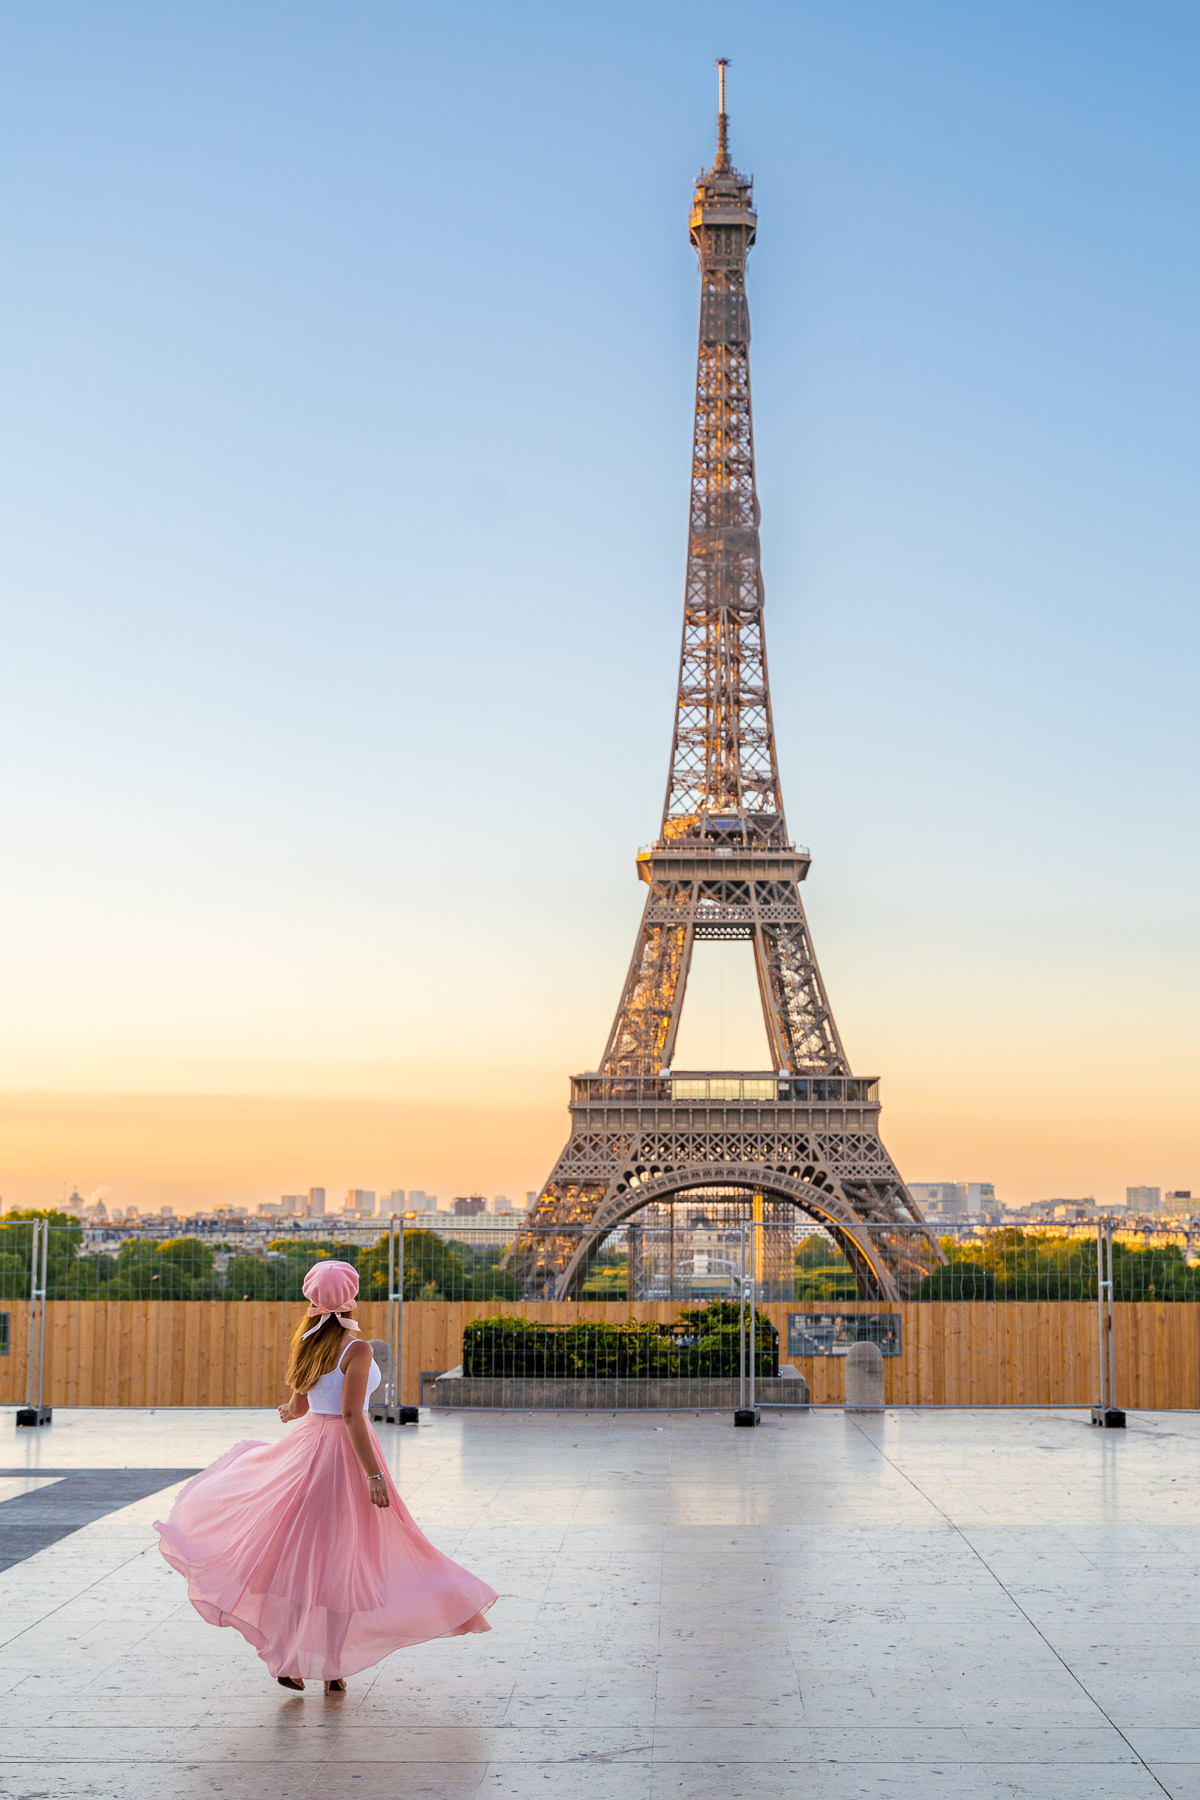 Girl in a pink skirt in front of the Eiffel Tower at Trocadero, Paris